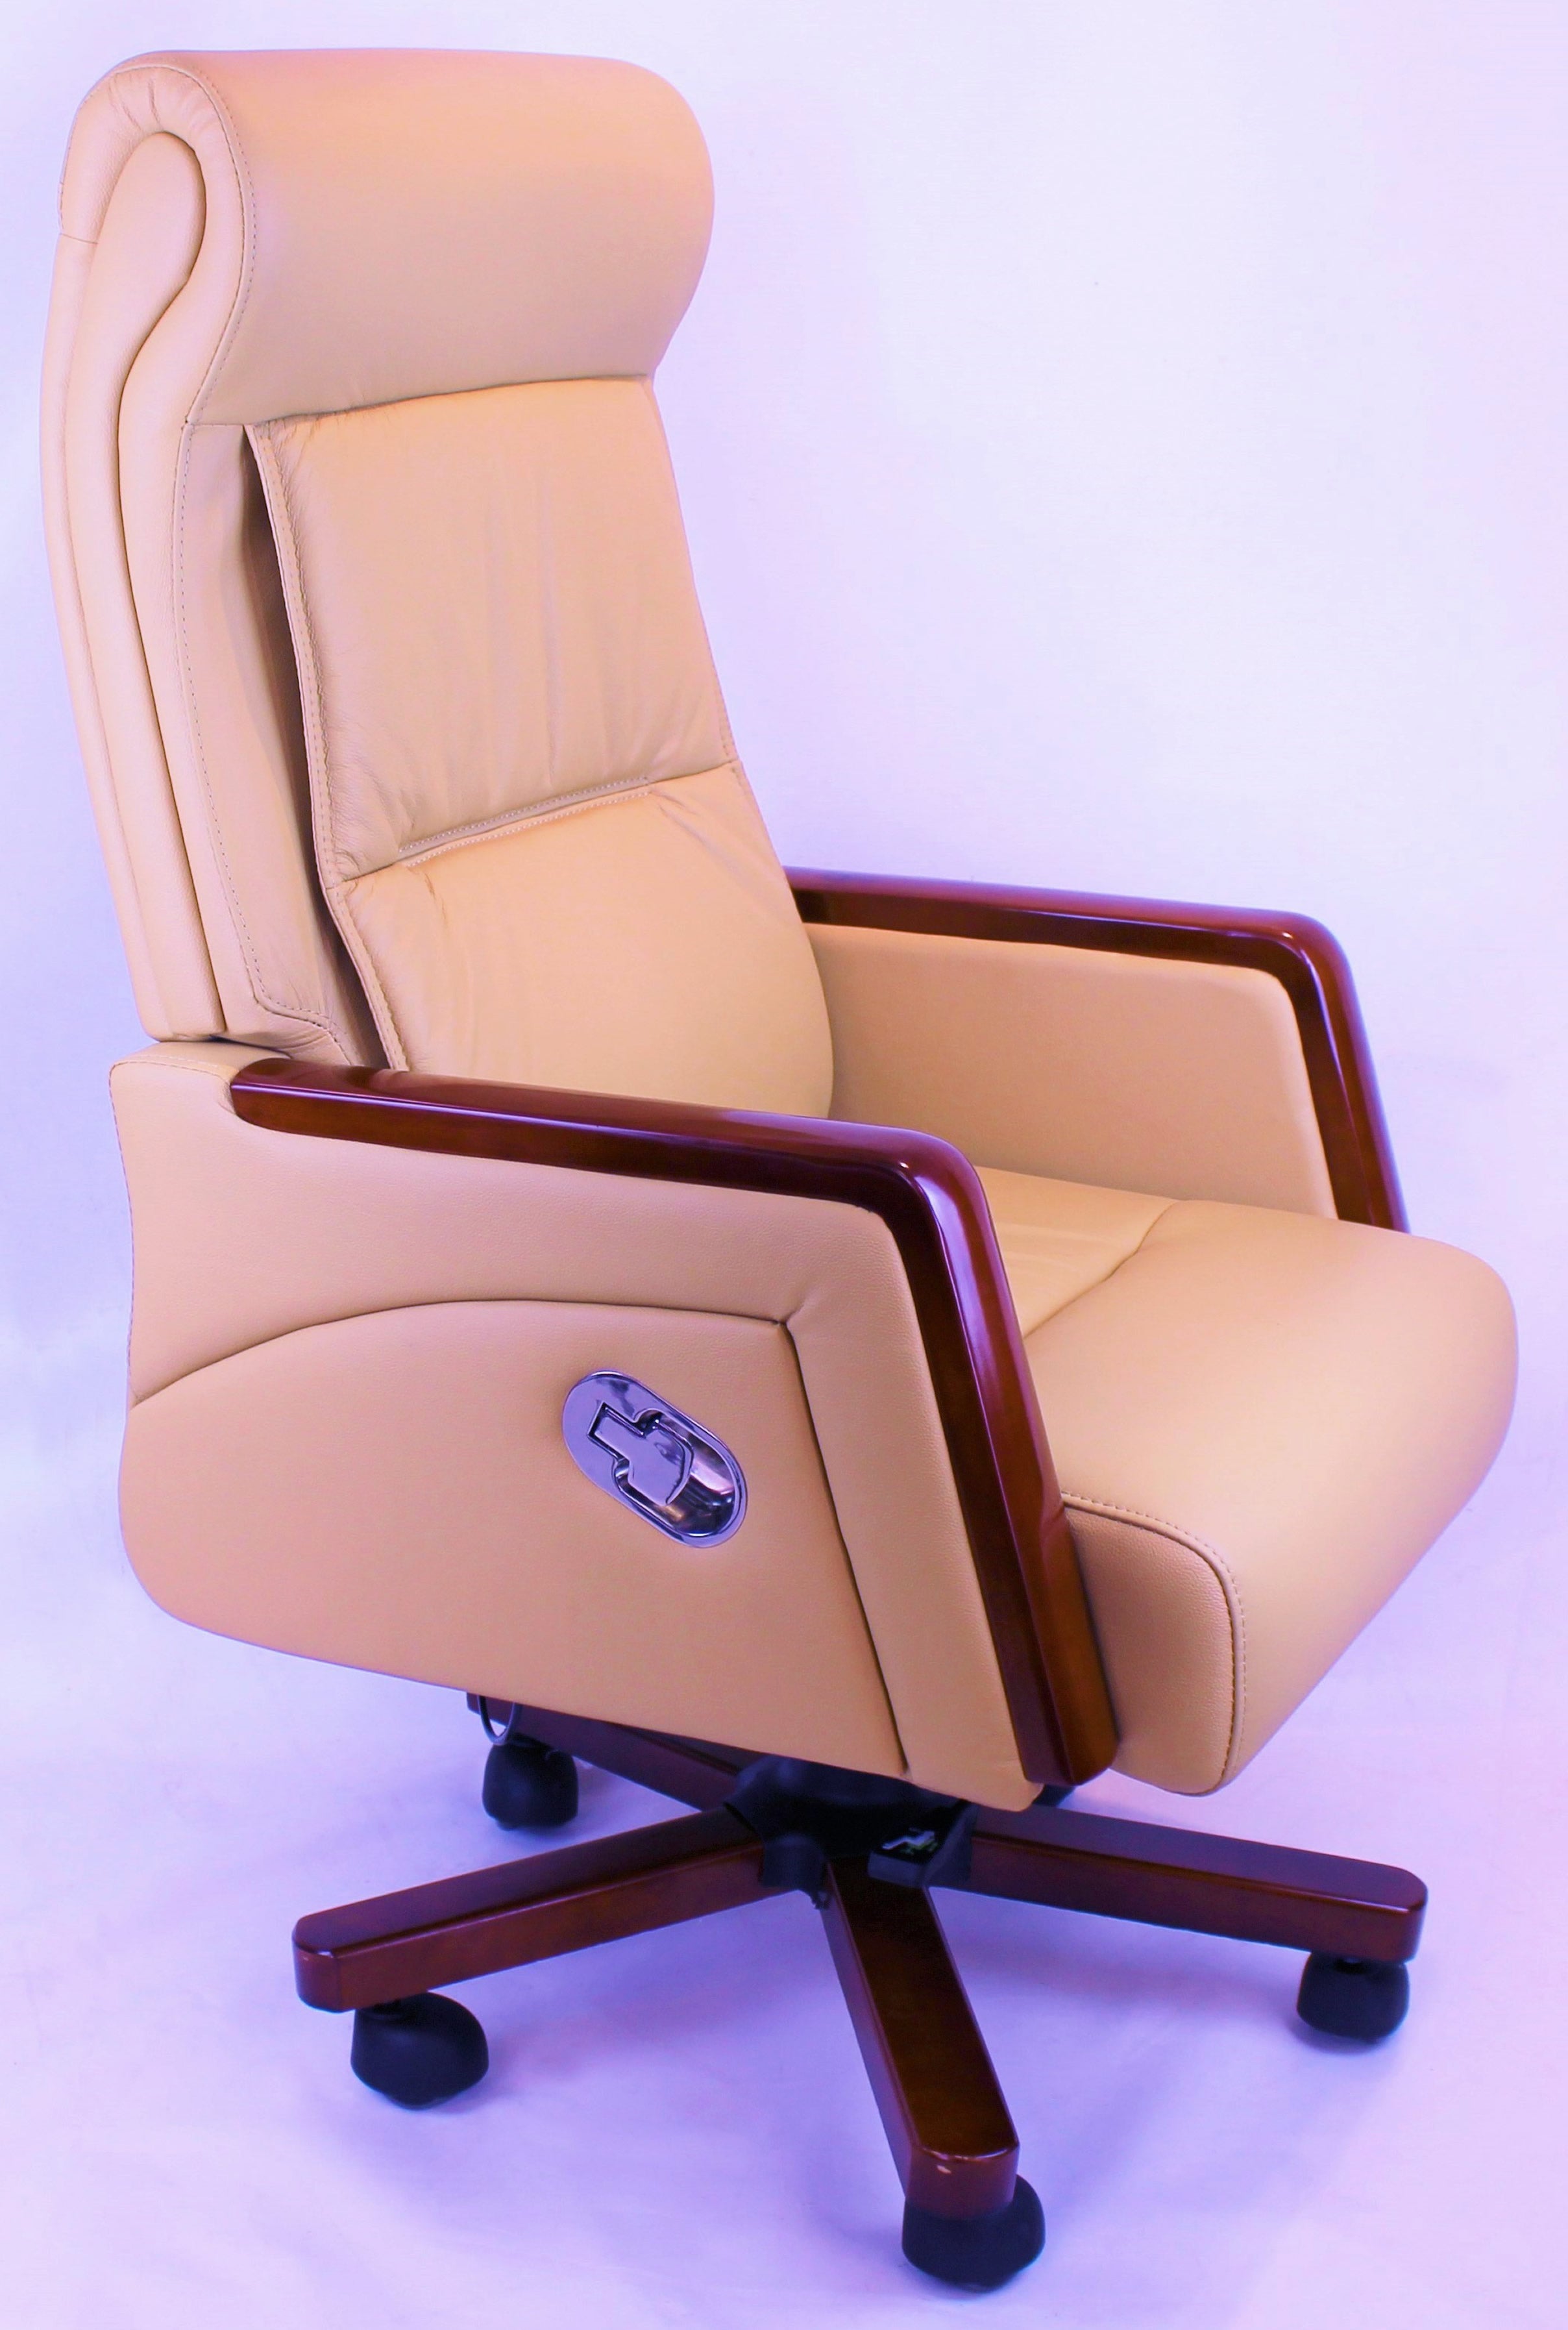 Reclining Beige Leather Executive Office Chair with Wooden Arms - SZ-A109